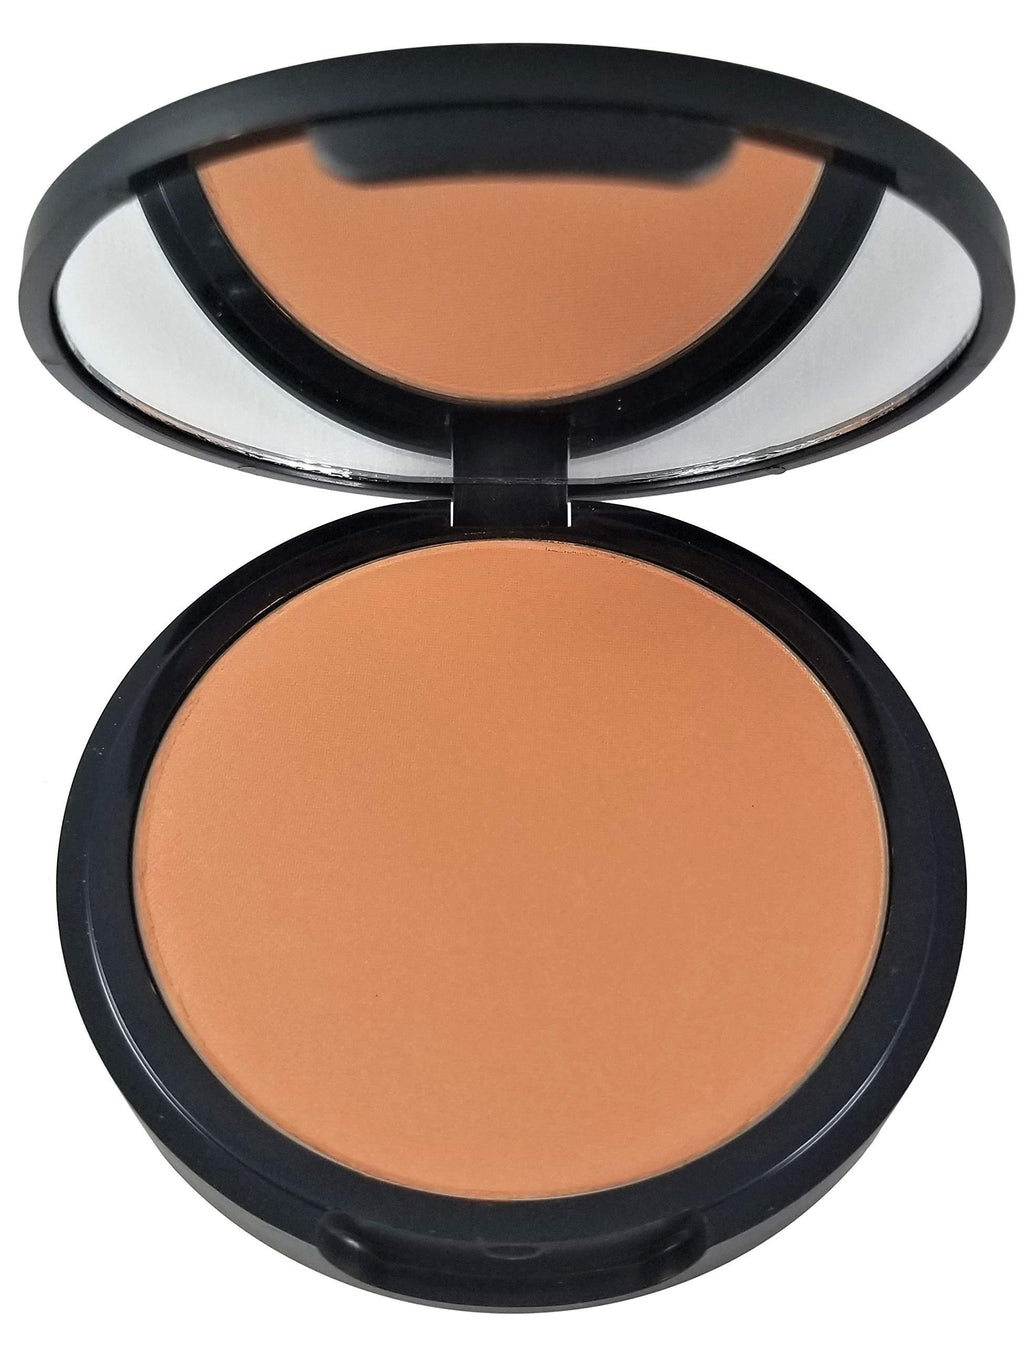 Organic Bronzer | Natural & Non-Toxic | Skin Enhancing Ingredients | Hypoallergenic, Highly Pigmented Formula For A Youthful, Sun-Kissed Look (Miami Bronze) by Luxury by Sofia Miami Bronze - BeesActive Australia